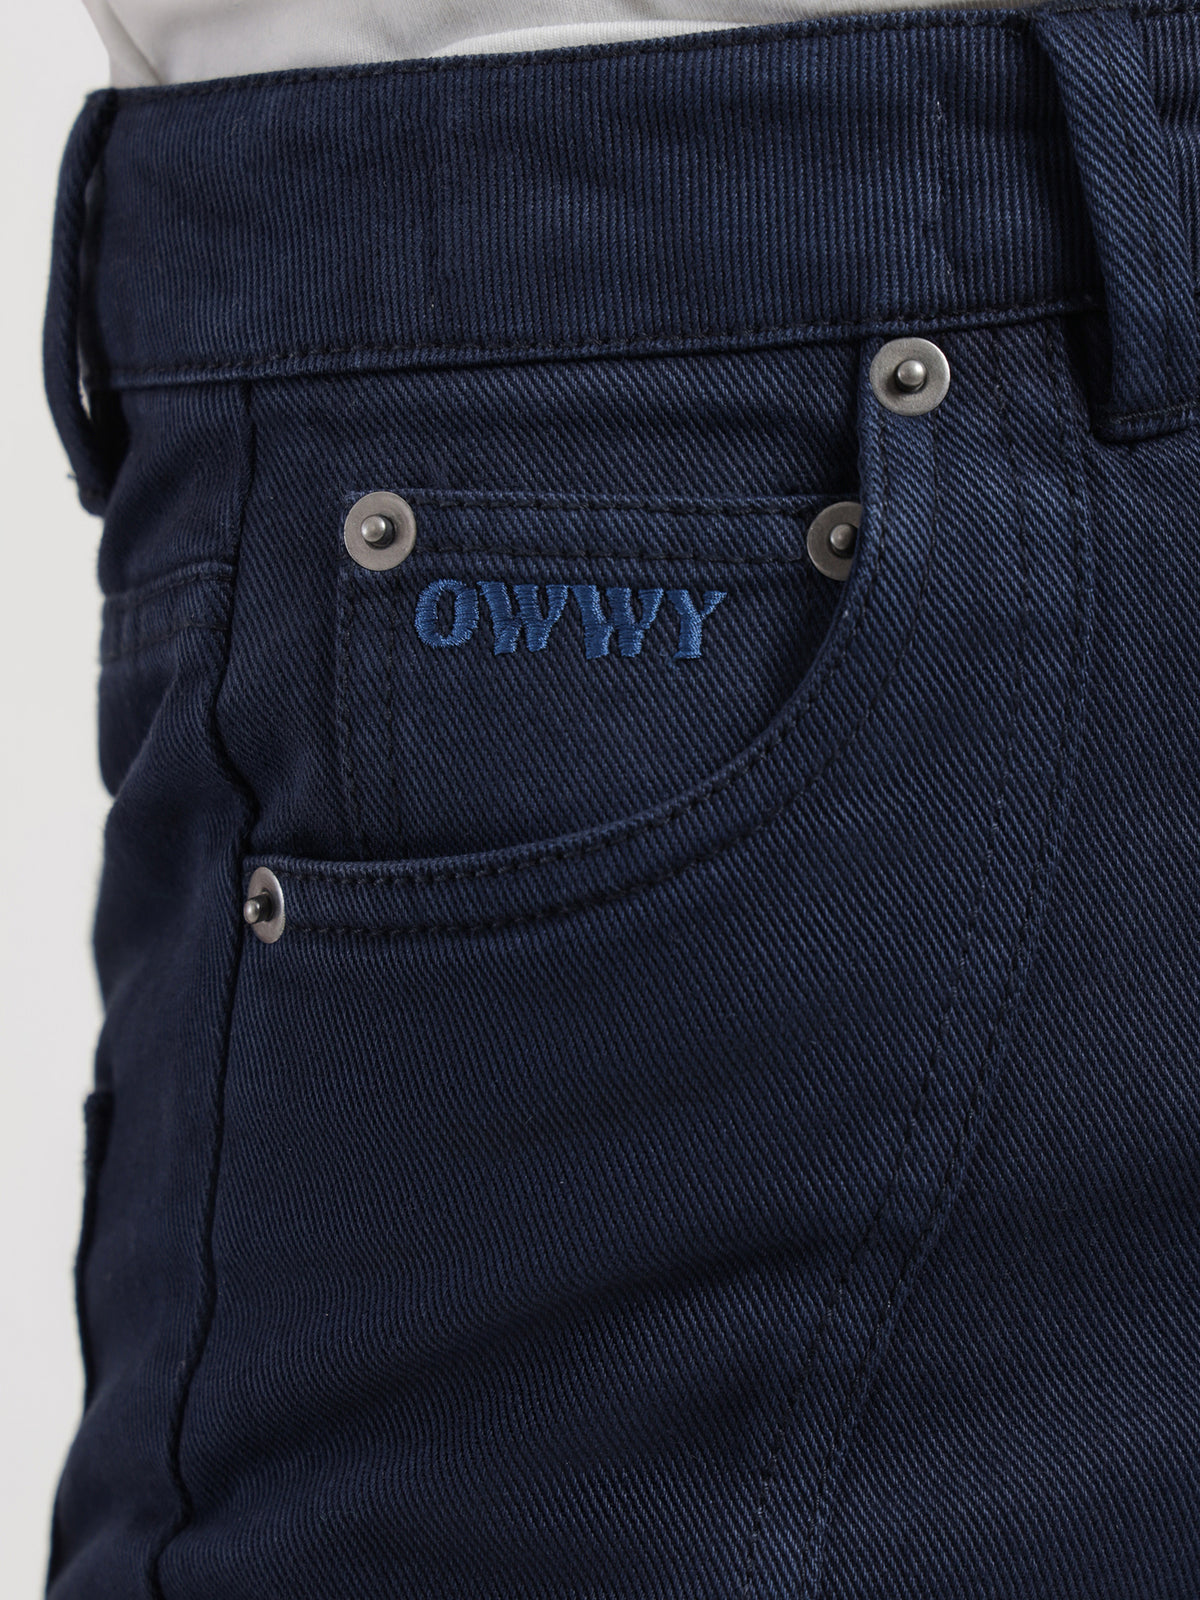 Curly Whirl Jeans in Indigo Blue